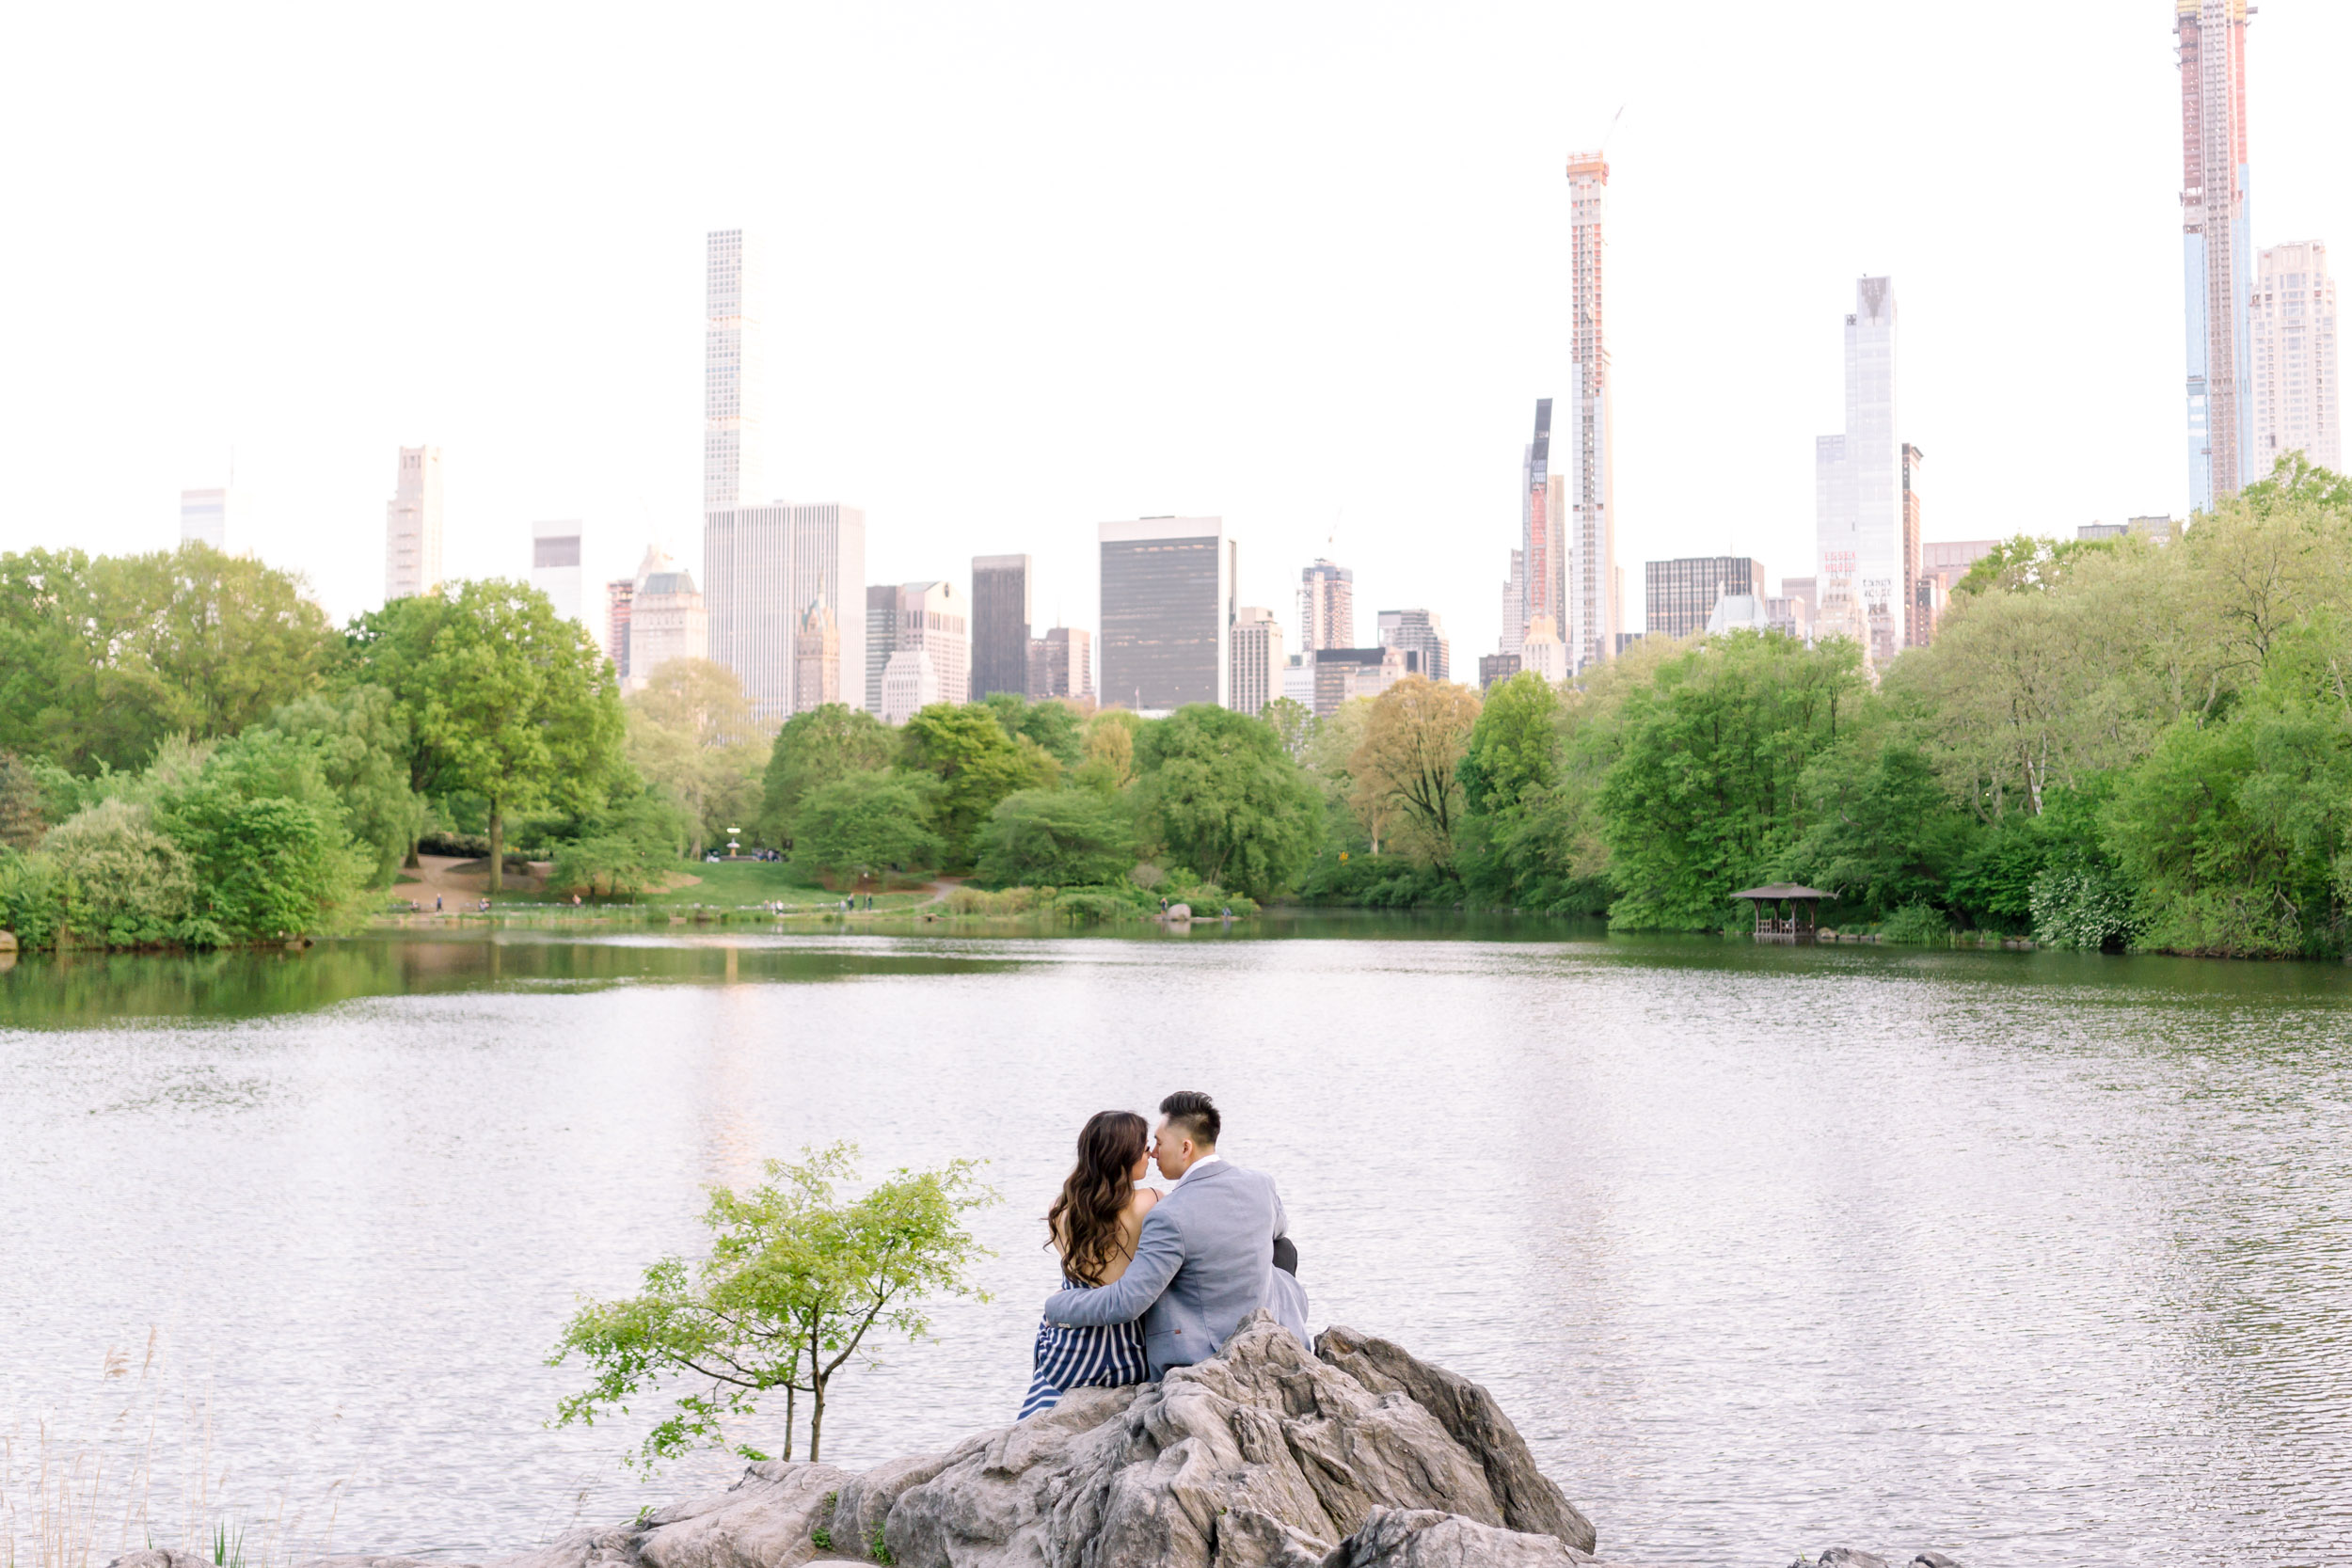 A couple at Central Park for their New York City engagement photos